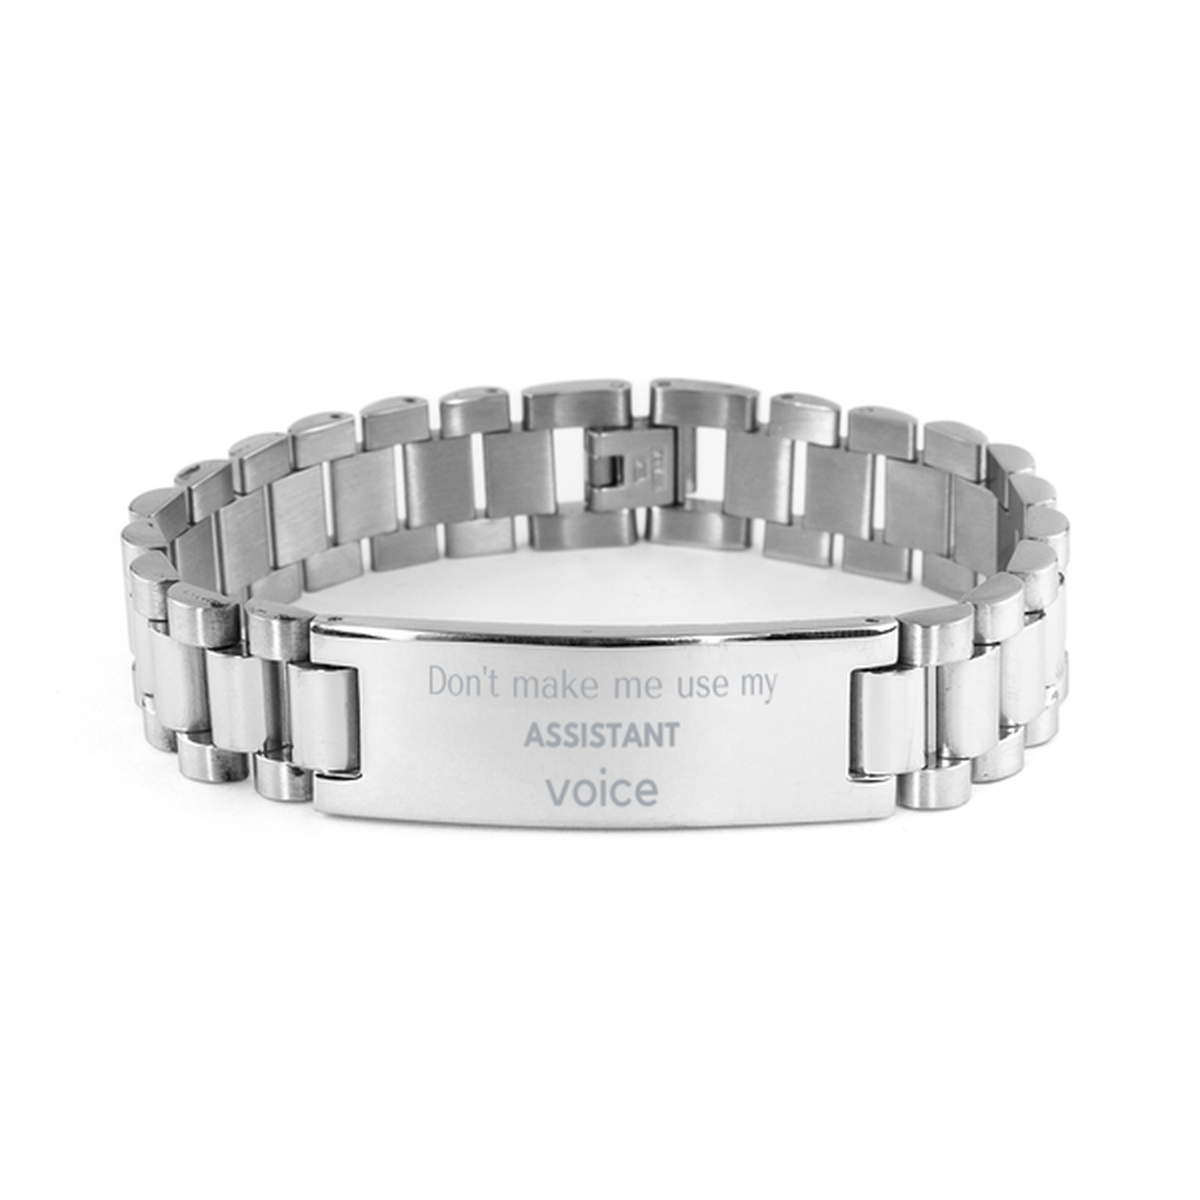 Don't make me use my Assistant voice, Sarcasm Assistant Gifts, Christmas Assistant Ladder Stainless Steel Bracelet Birthday Unique Gifts For Assistant Coworkers, Men, Women, Colleague, Friends